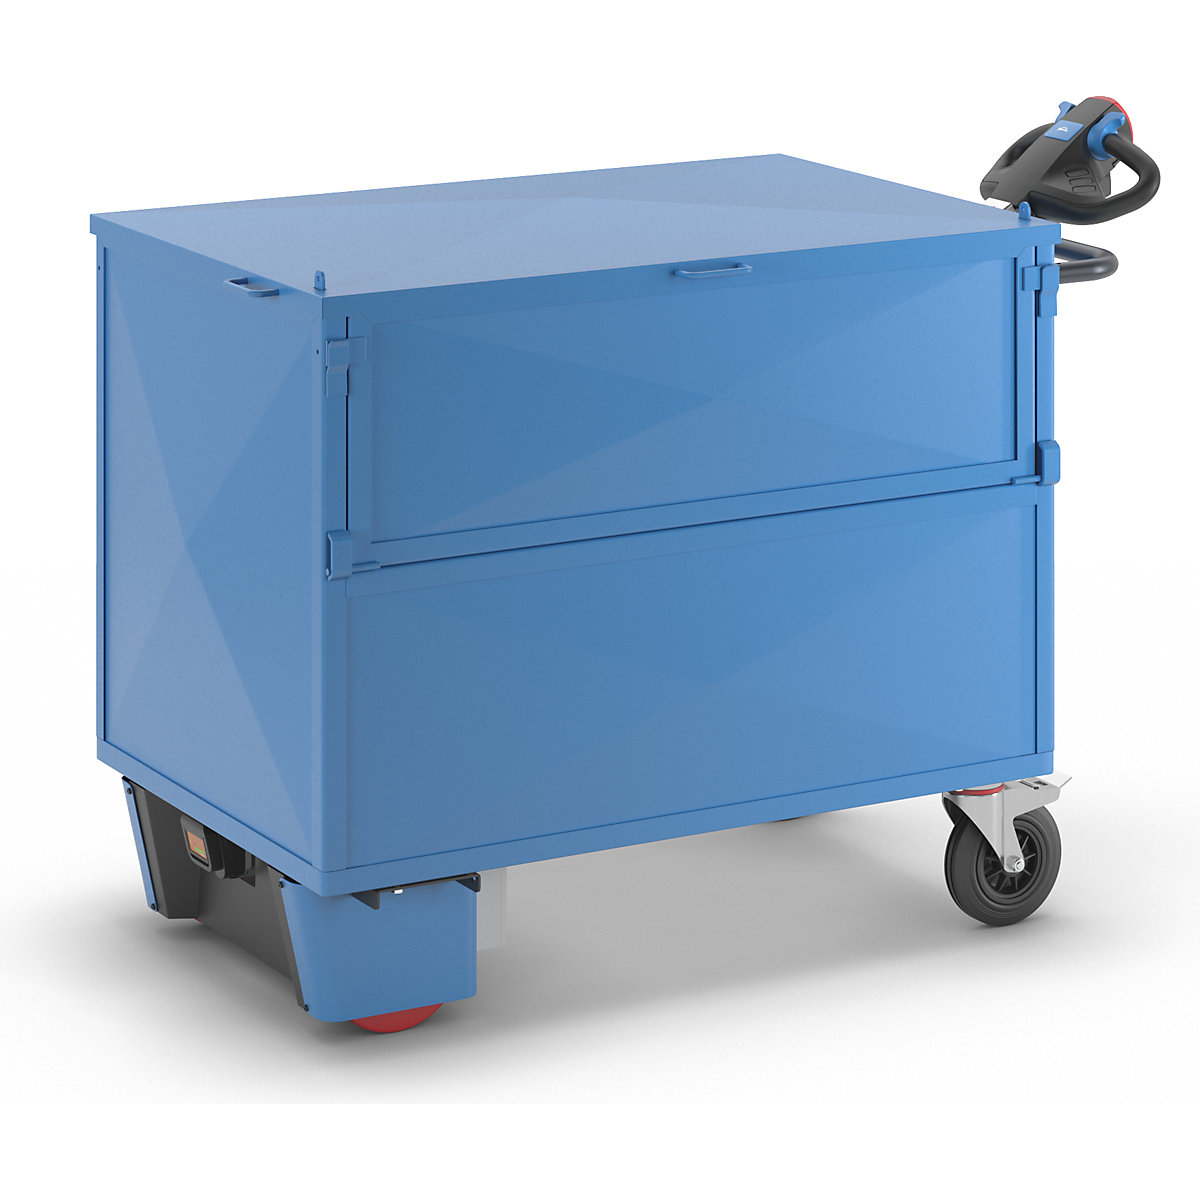 Box truck with electric drive – eurokraft pro, panels made of sheet steel, with lid, LxWxH 1630 x 850 x 1200 mm-1